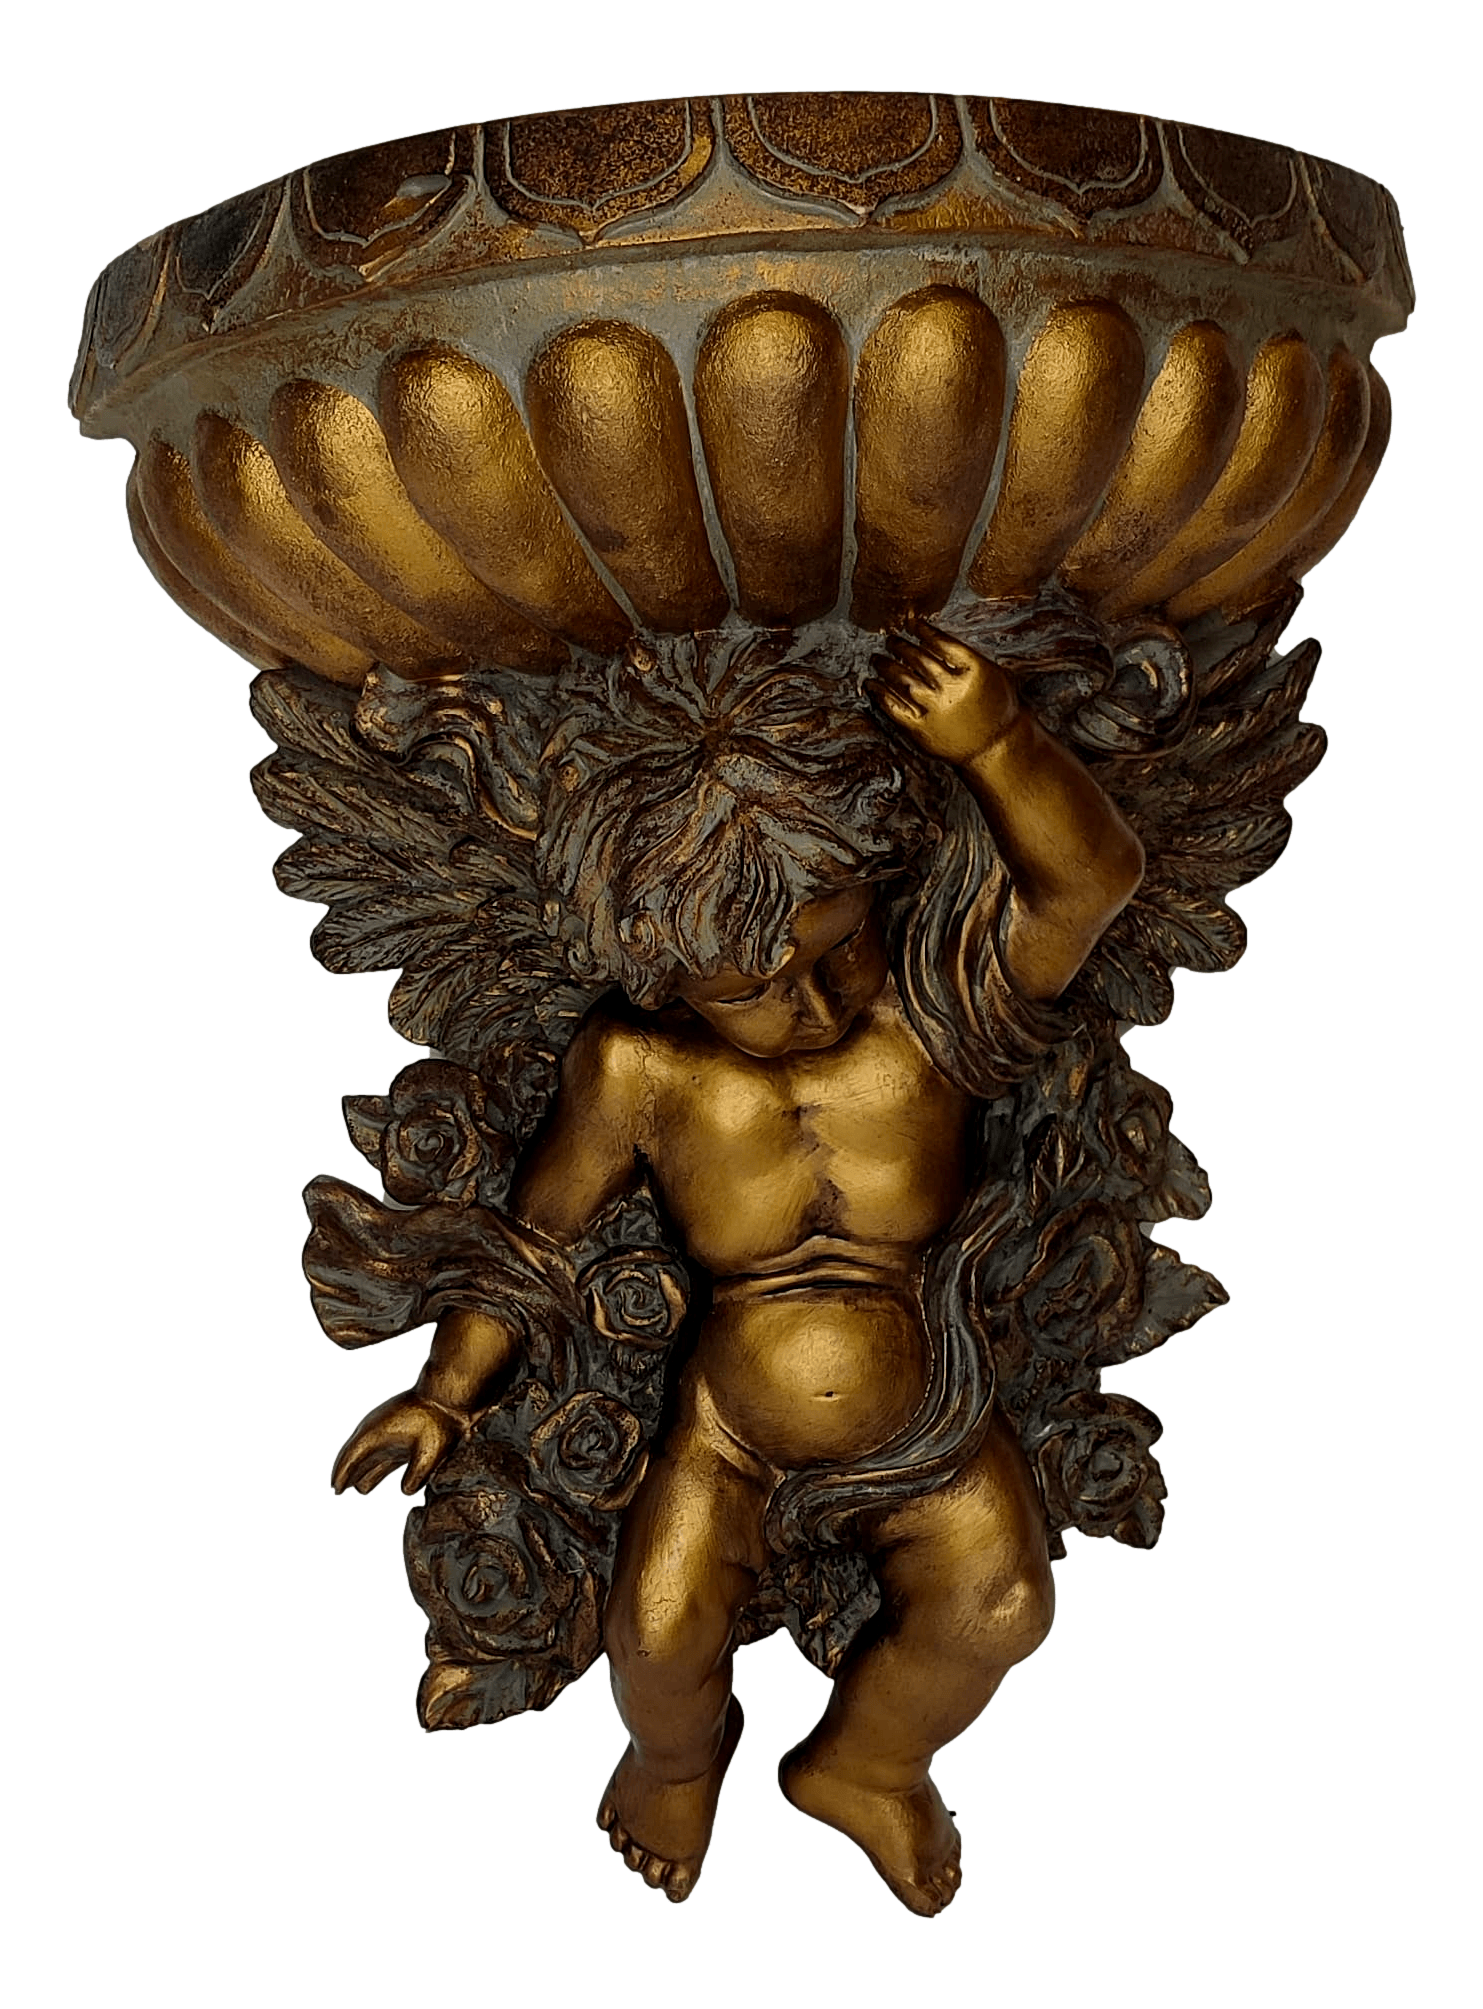 Wall Shelf For Statue Cherub Antique Gold Baroque Style L: 12 inches X W: 9.5 inches - Ysleta Mission Gift Shop- VOTED El Paso's Best Gift Shop